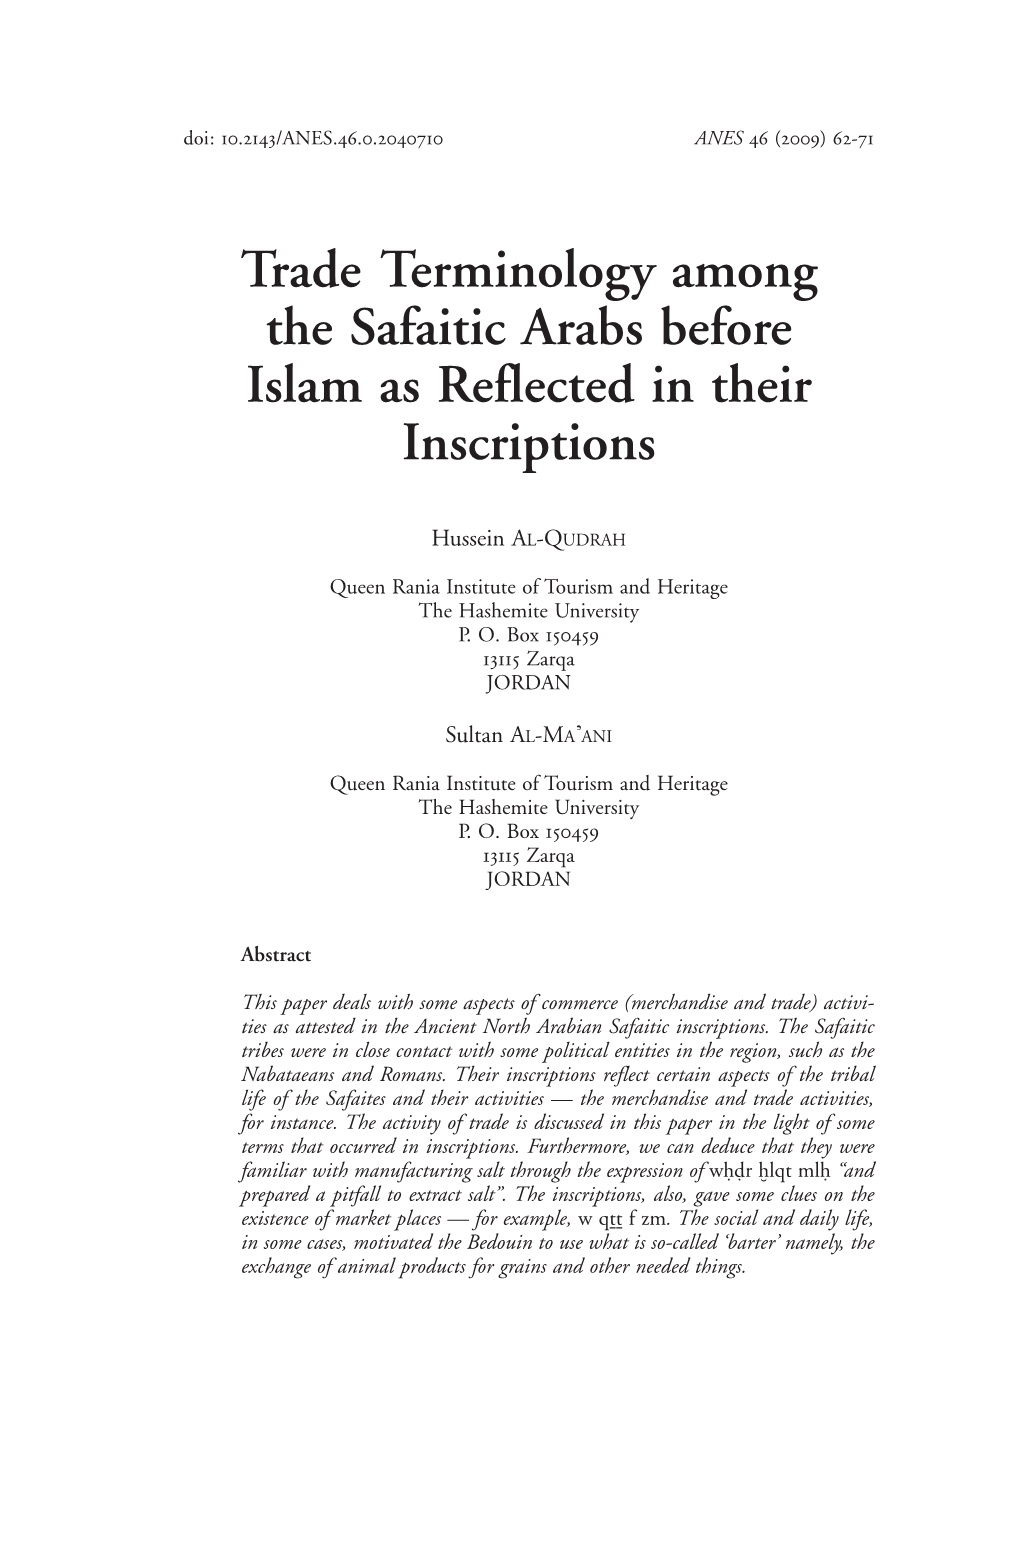 Trade Terminology Among the Safaitic Arabs Before Islam As Reflected in Their Inscriptions